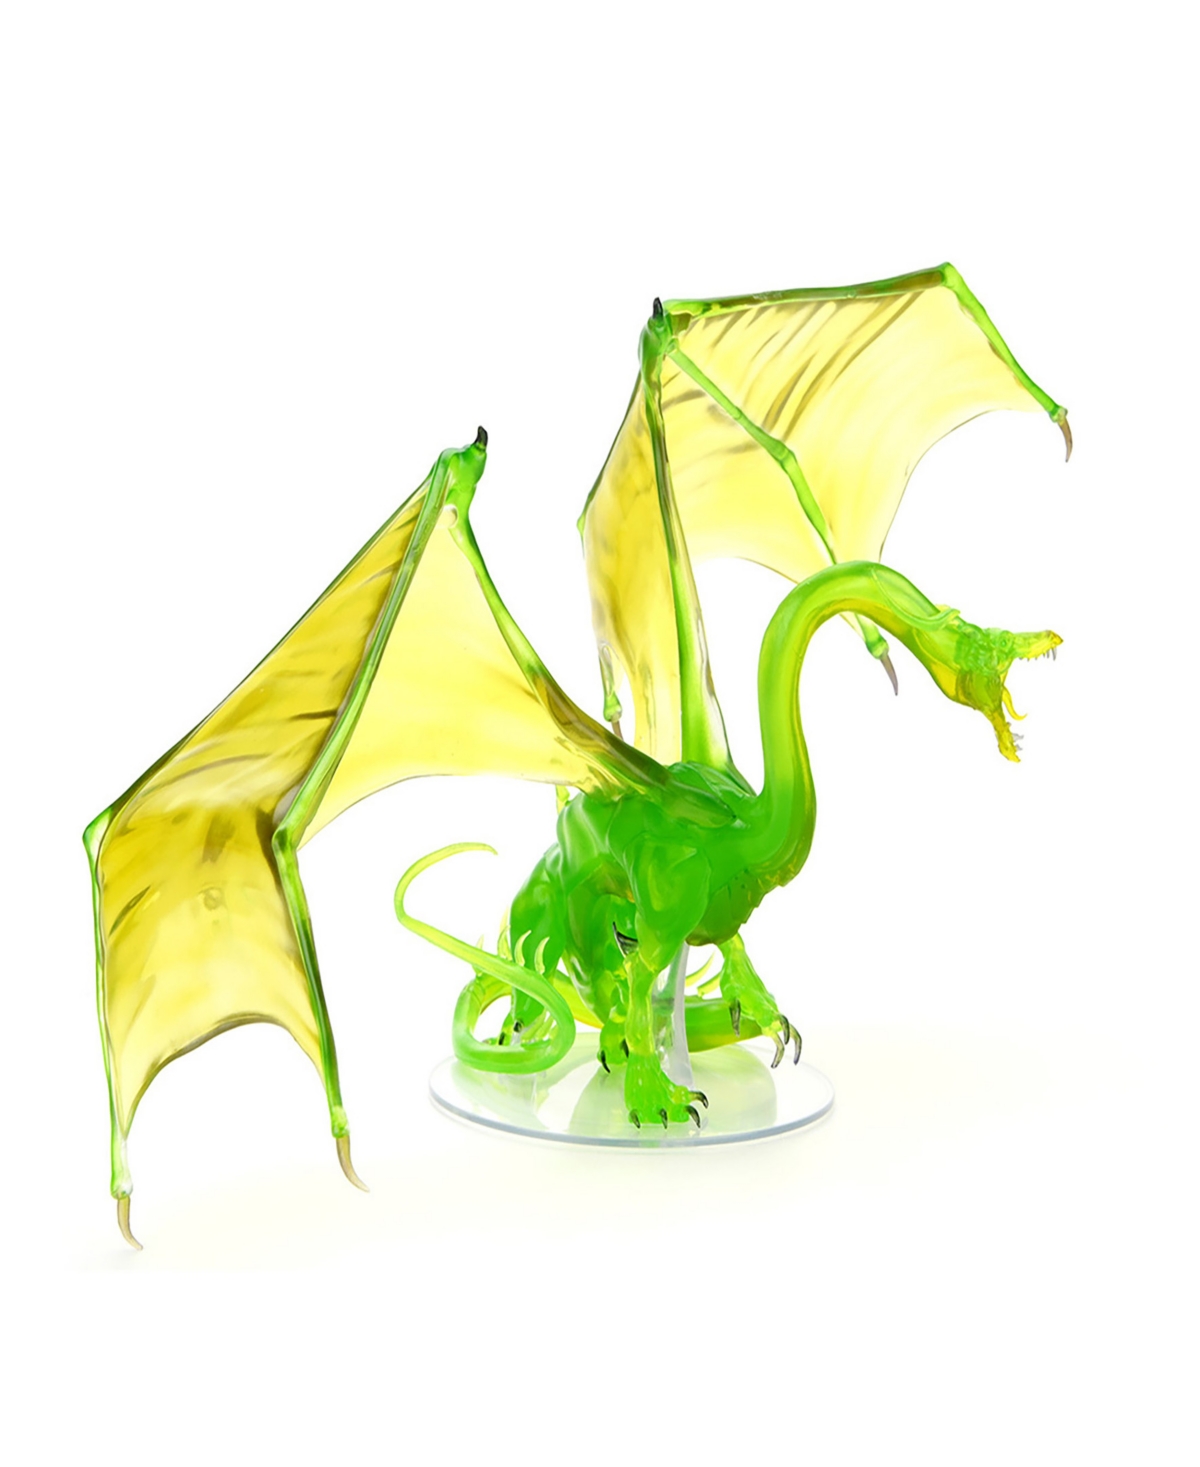 Shop Wizkids Games Dungeons Dragons Icons Of The Realms Adult Emerald Dragon Premium Figure In Multi